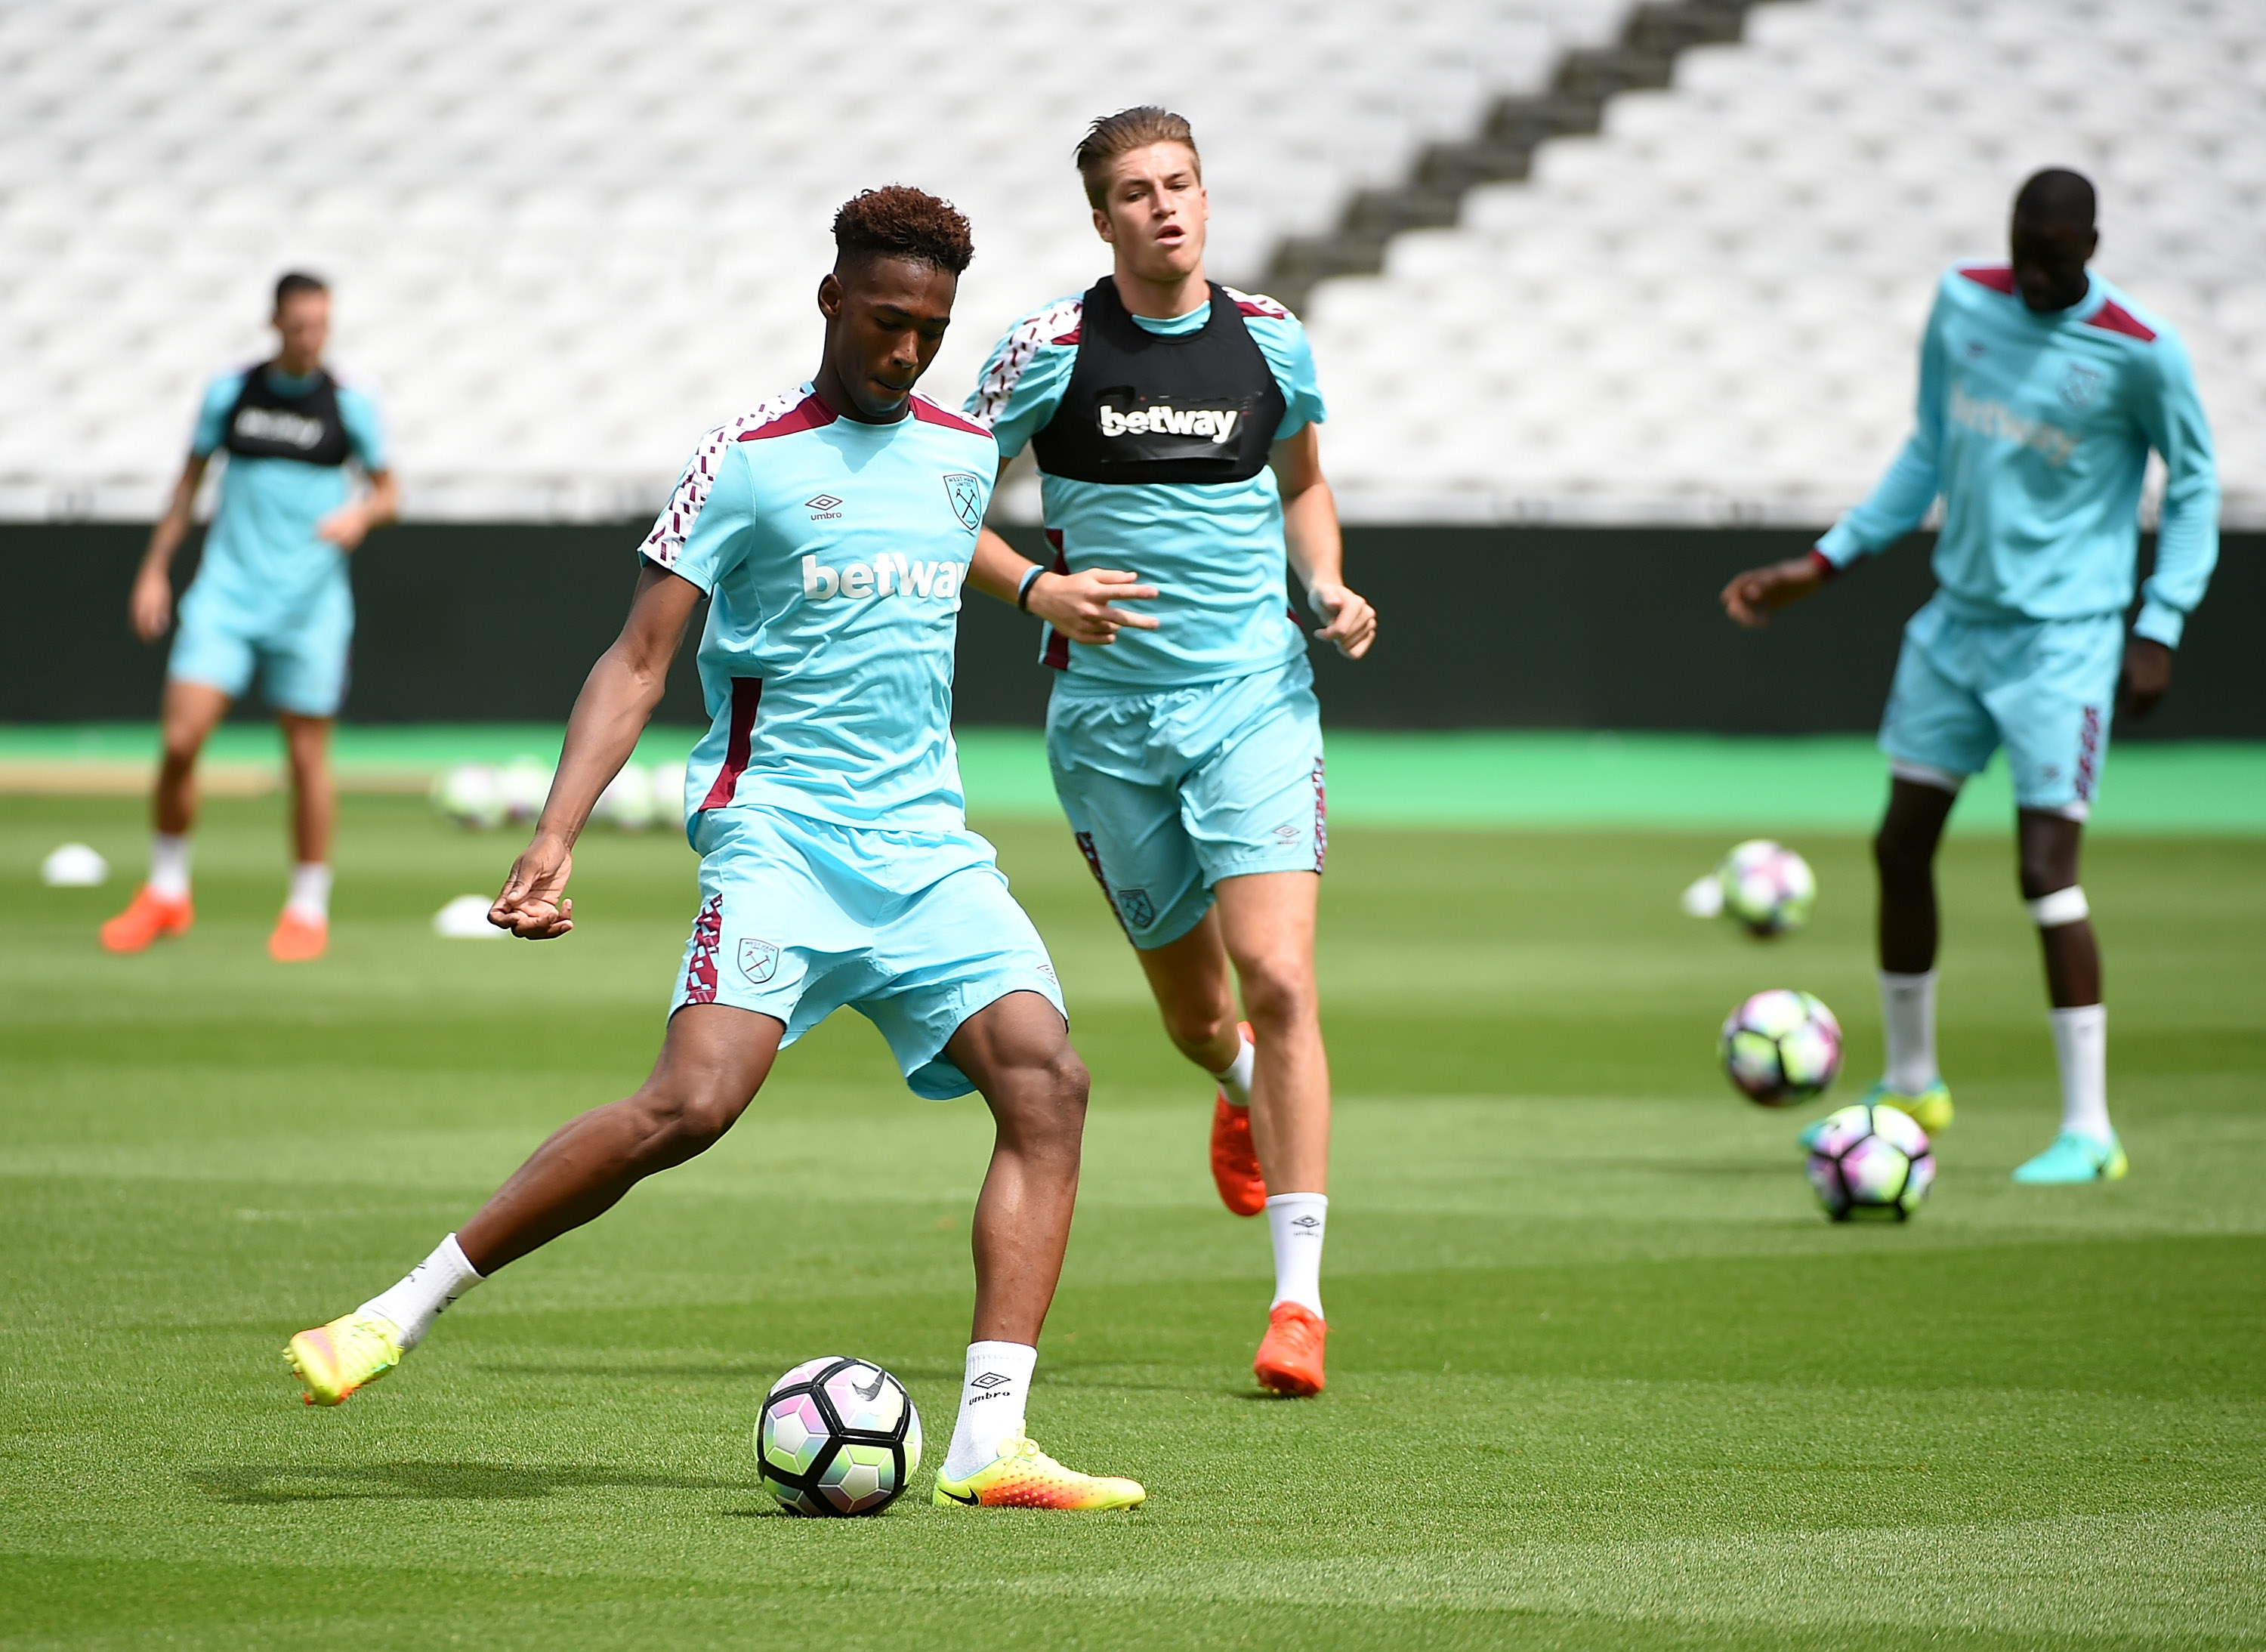 LONDON, ENGLAND - AUGUST 03:  Reece Oxford of West Ham United in action during the West Ham United training session at London Stadium in Queen Elizabeth Olympic Park on August 3, 2016 in London, England. (Photo by Tom Dulat/Getty Images).  (Photo by Tom Dulat/Getty Images)